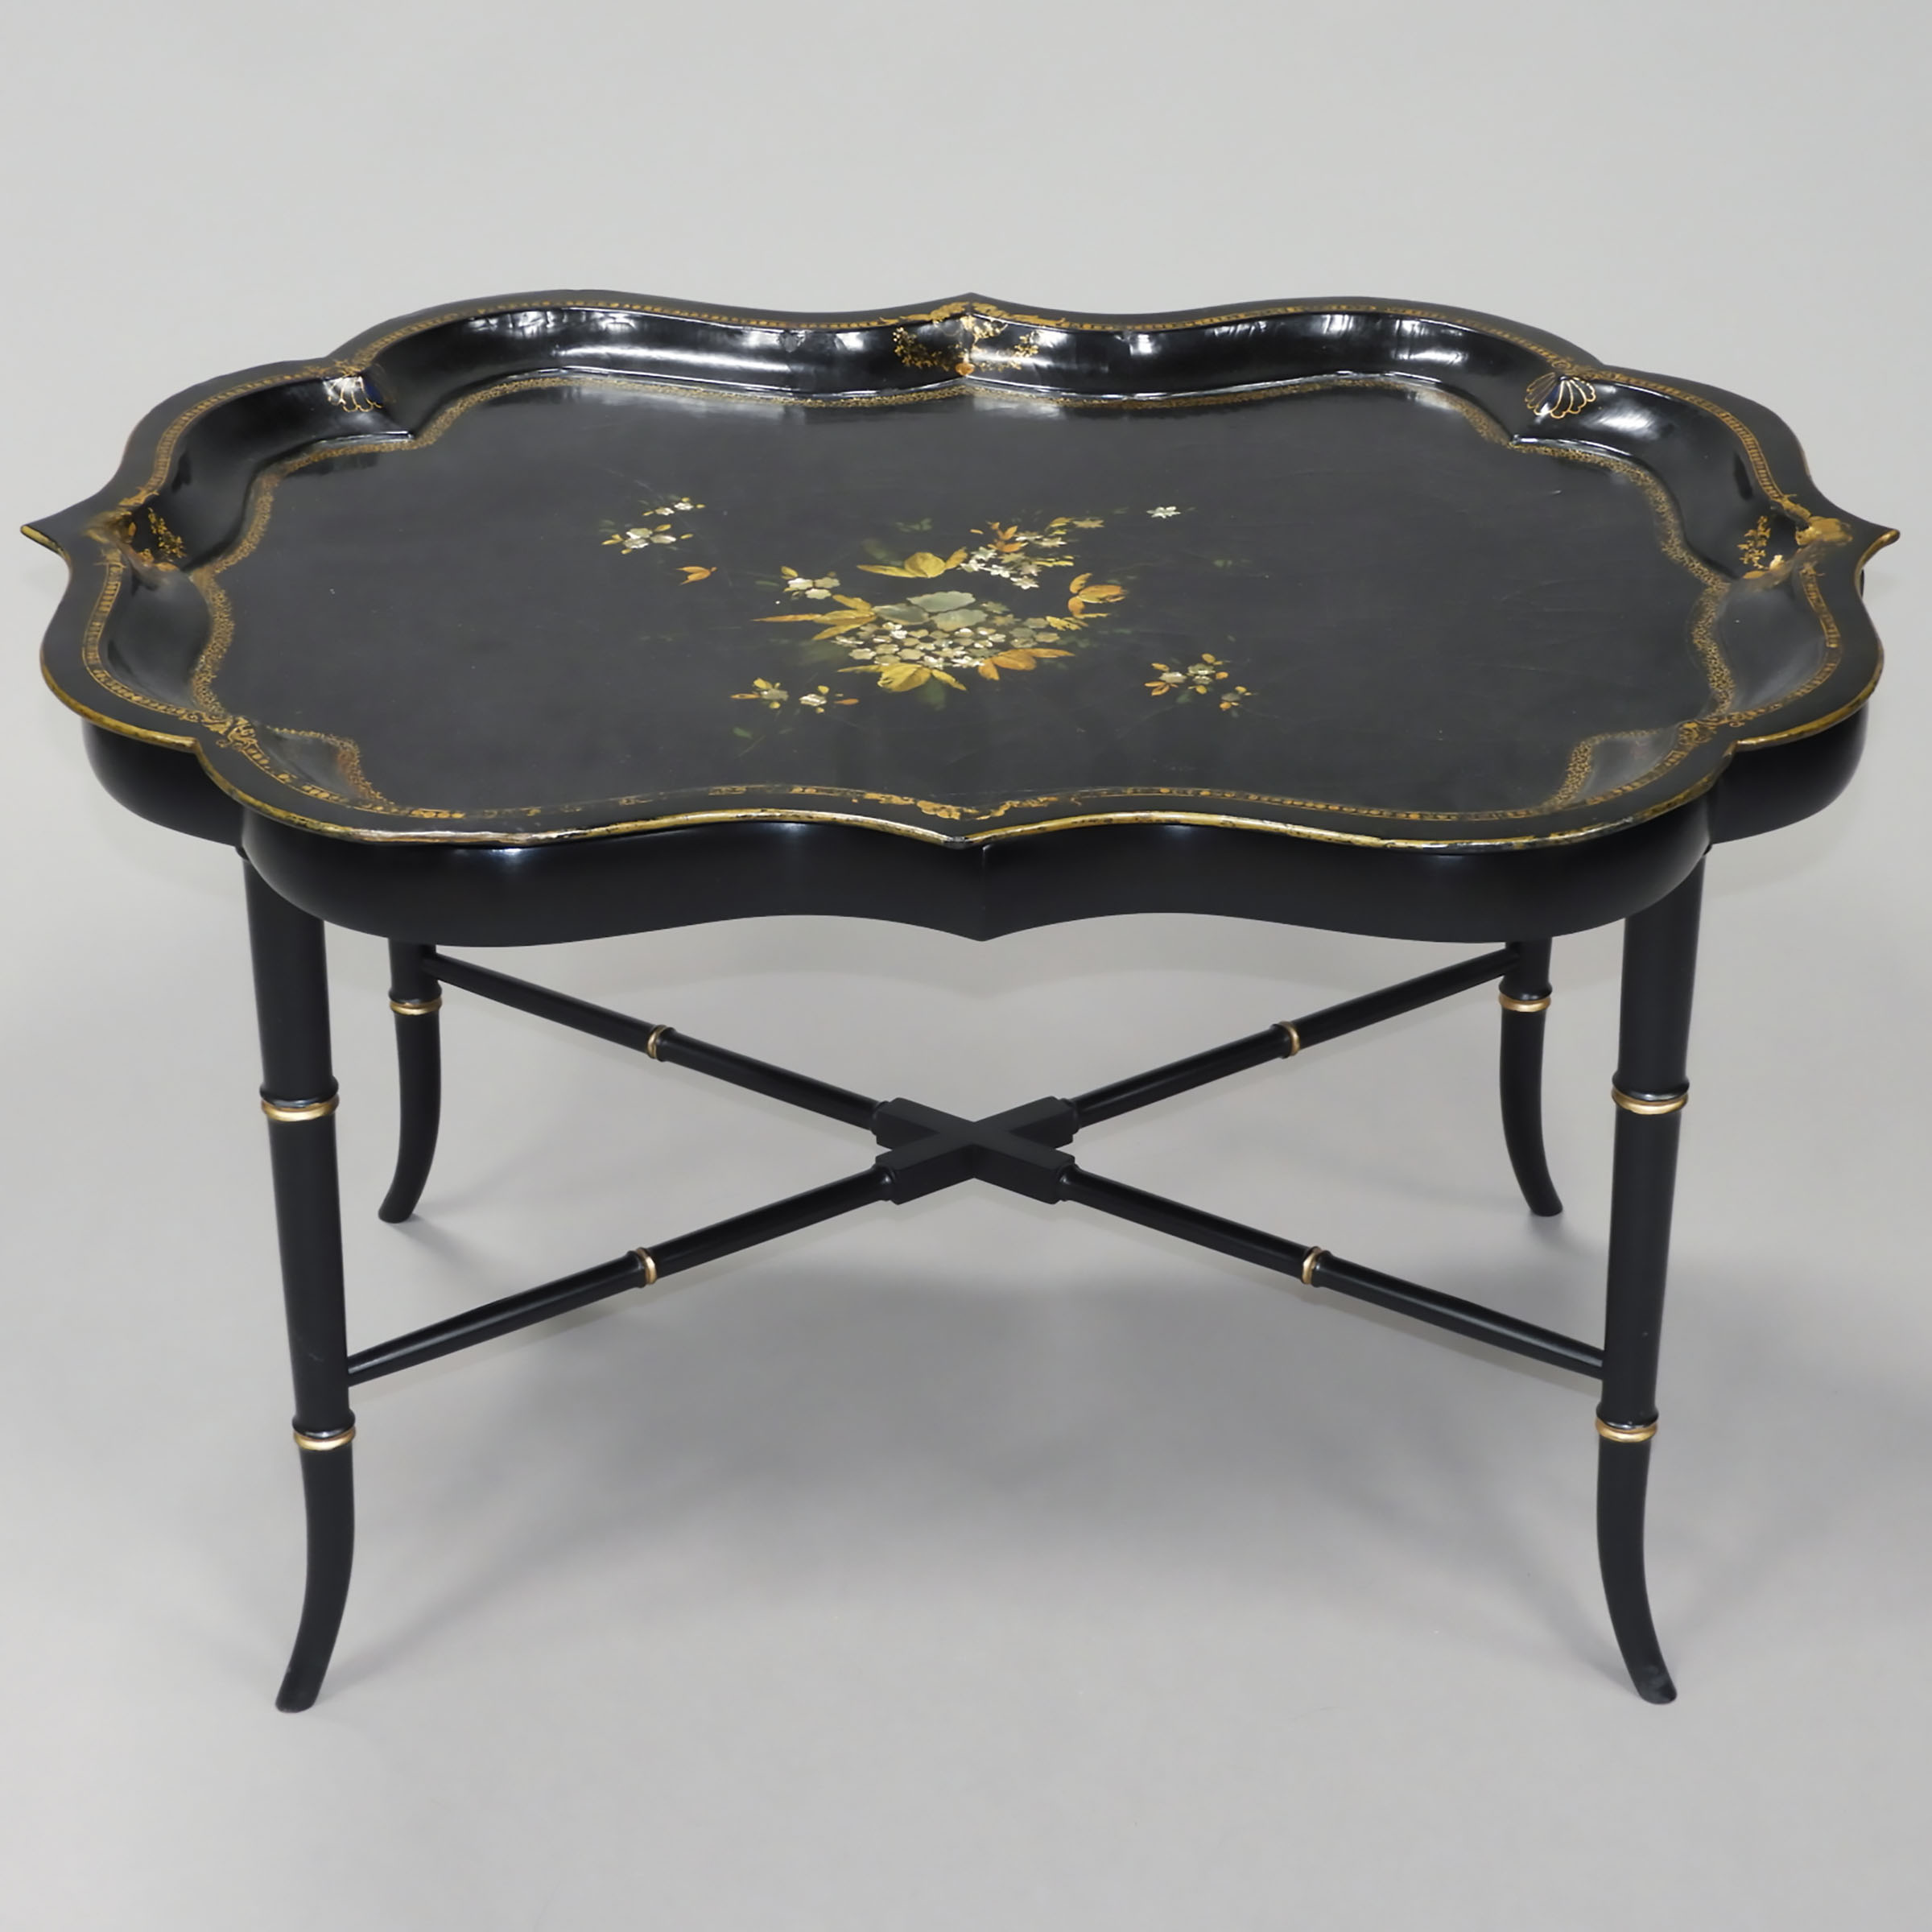 Victorian Black Lacquered Papier Maché Tea Tray on Stand, mid 19th century and Later